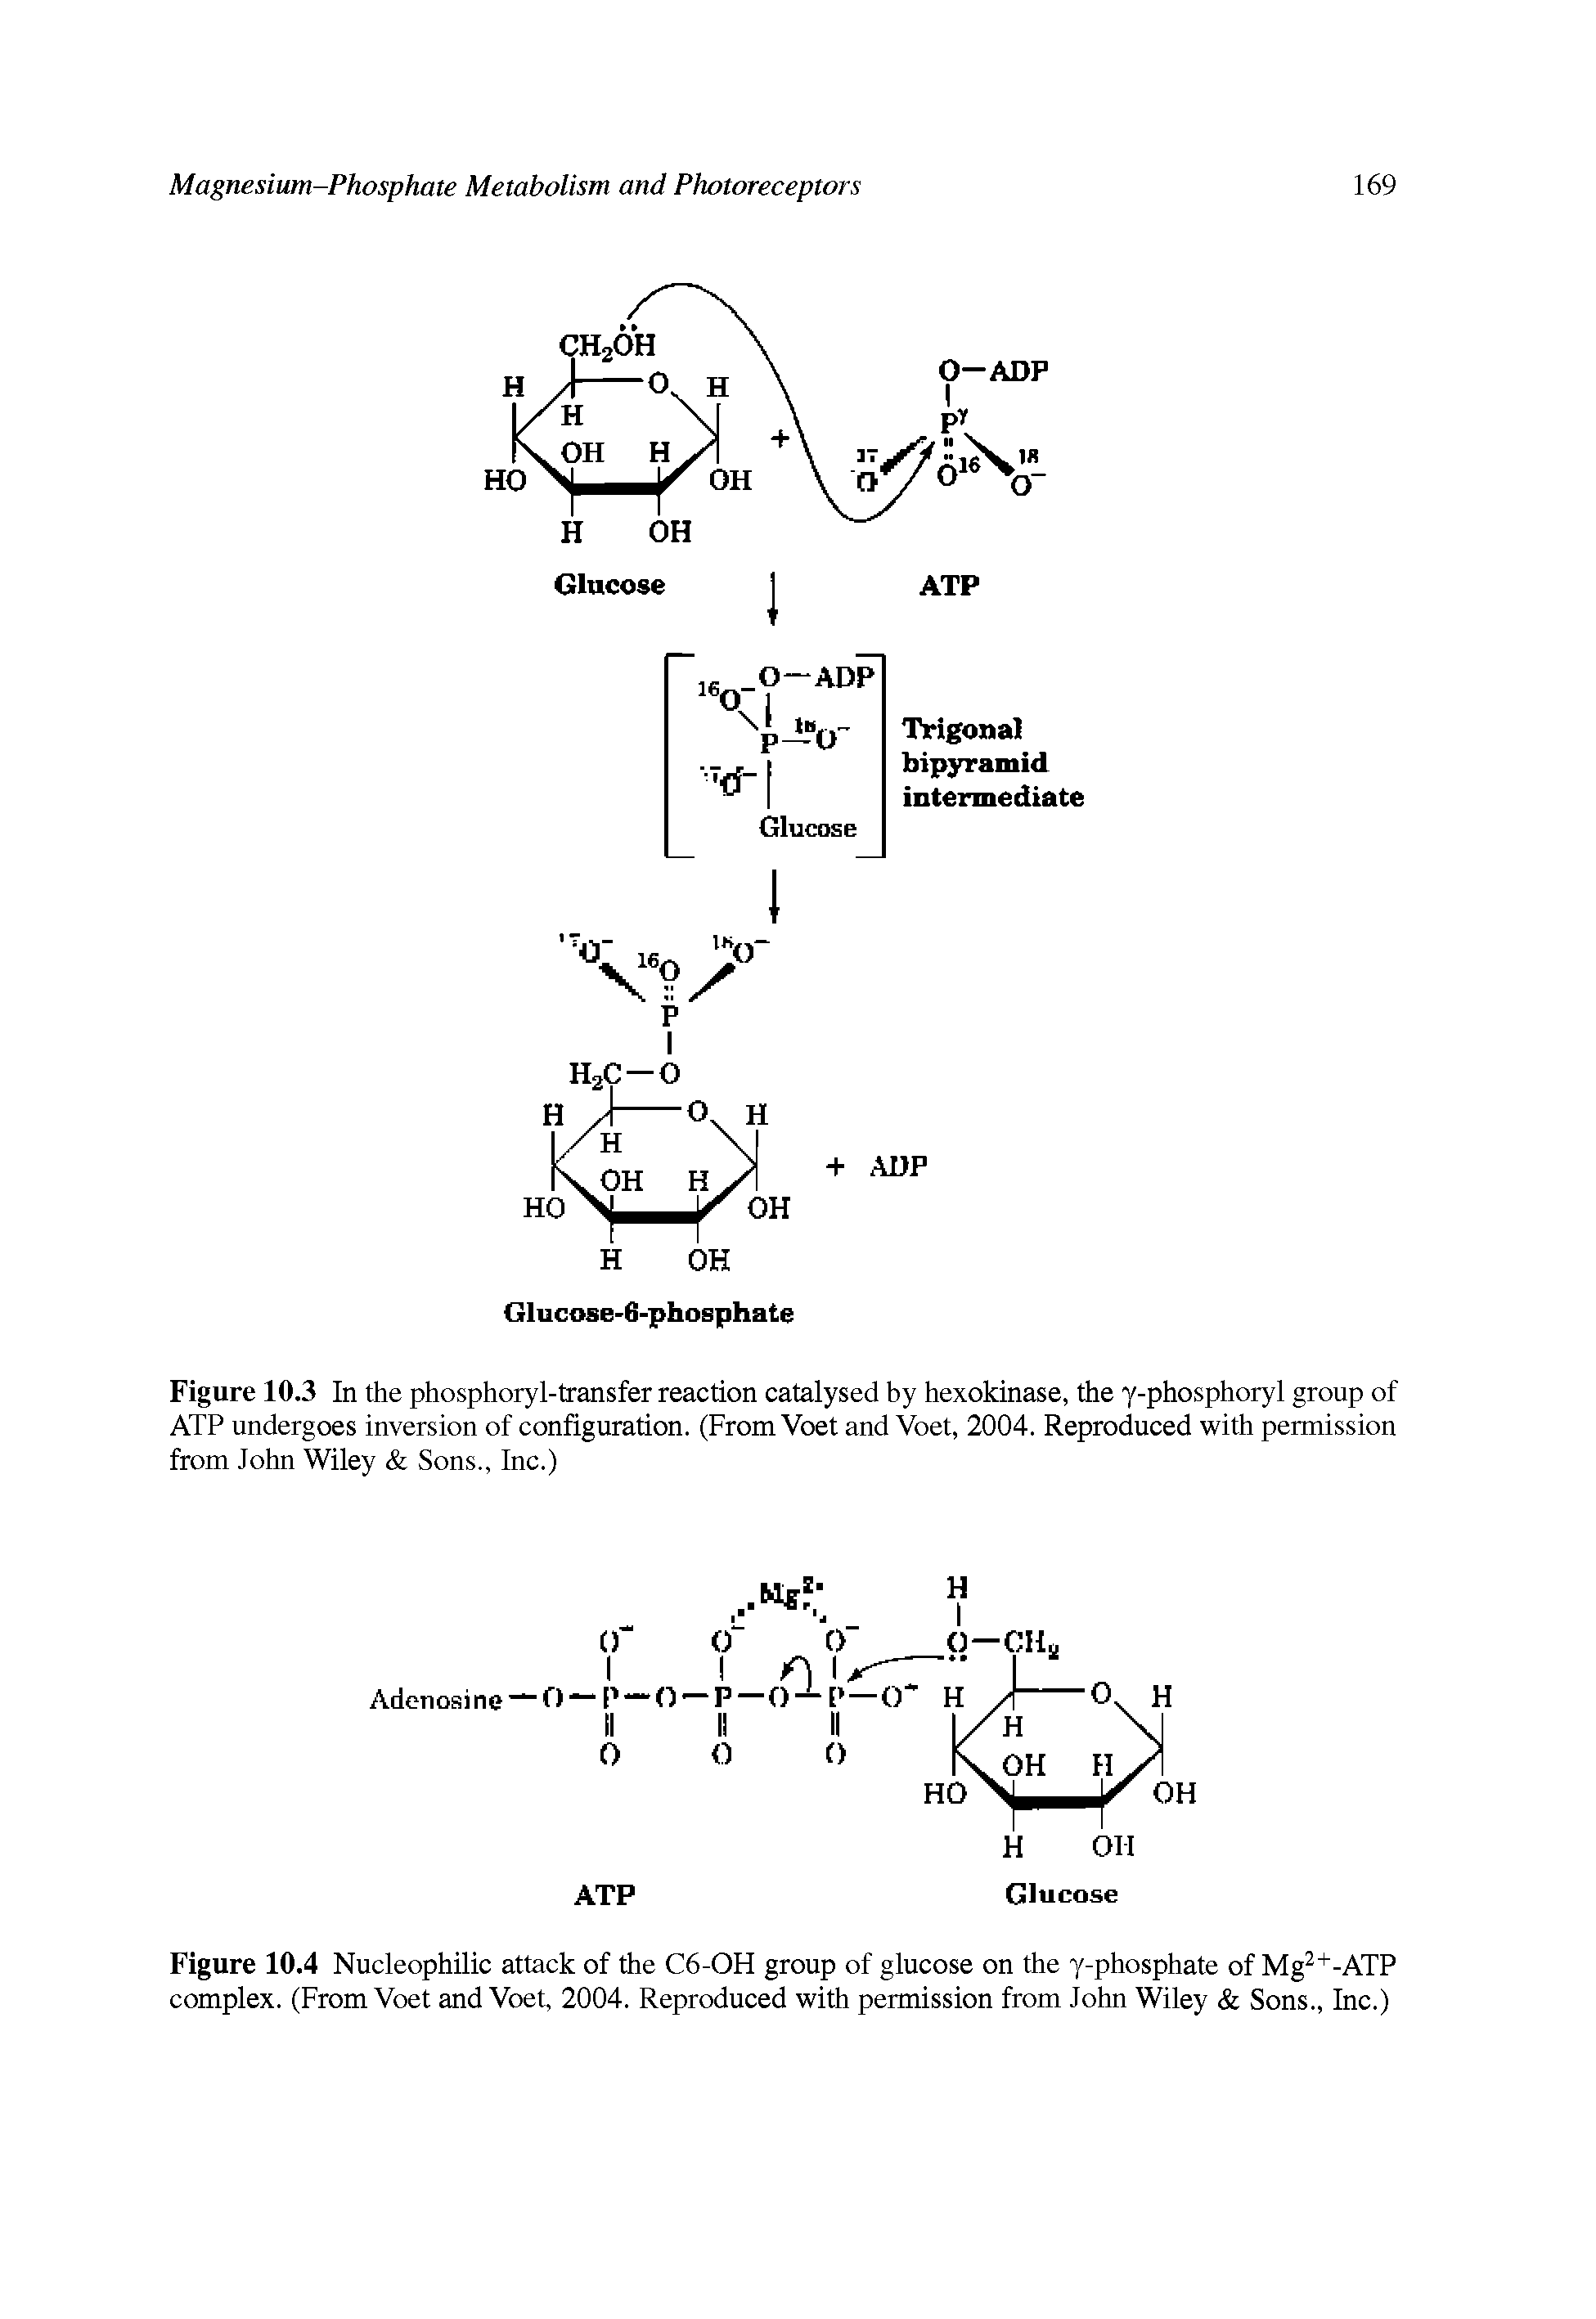 Figure 10.3 In the phosphoryl-transfer reaction catalysed by hexokinase, the y-phosphoryl group of ATP undergoes inversion of configuration. (From Voet and Voet, 2004. Reproduced with permission from John Wiley Sons., Inc.)...